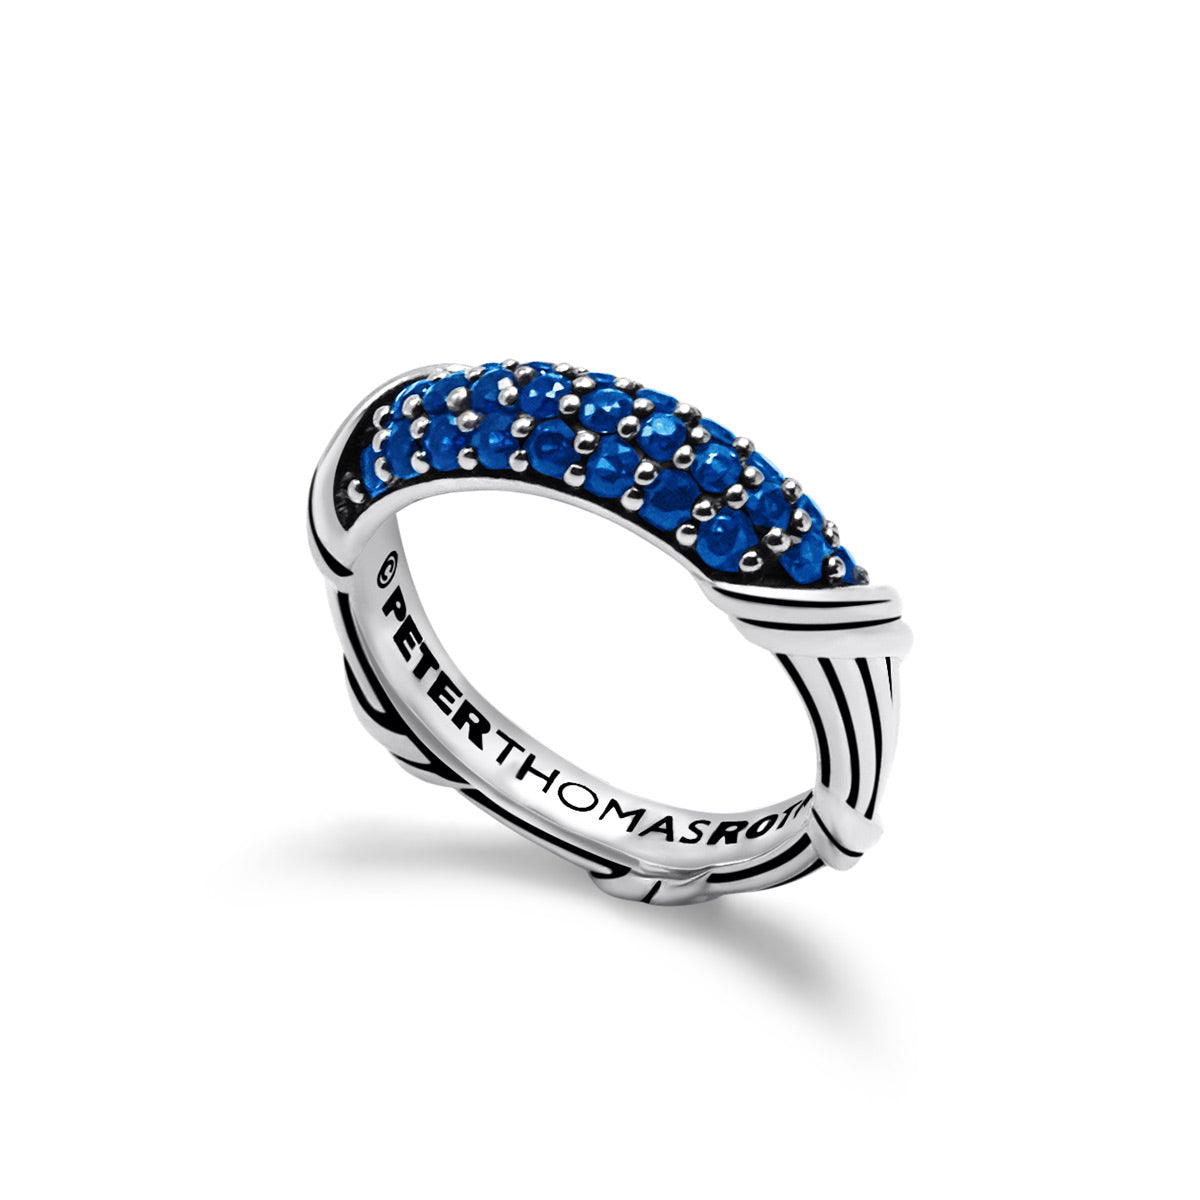 Signature Classic Pave Band Ring with blue sapphires in sterling silver 5mm